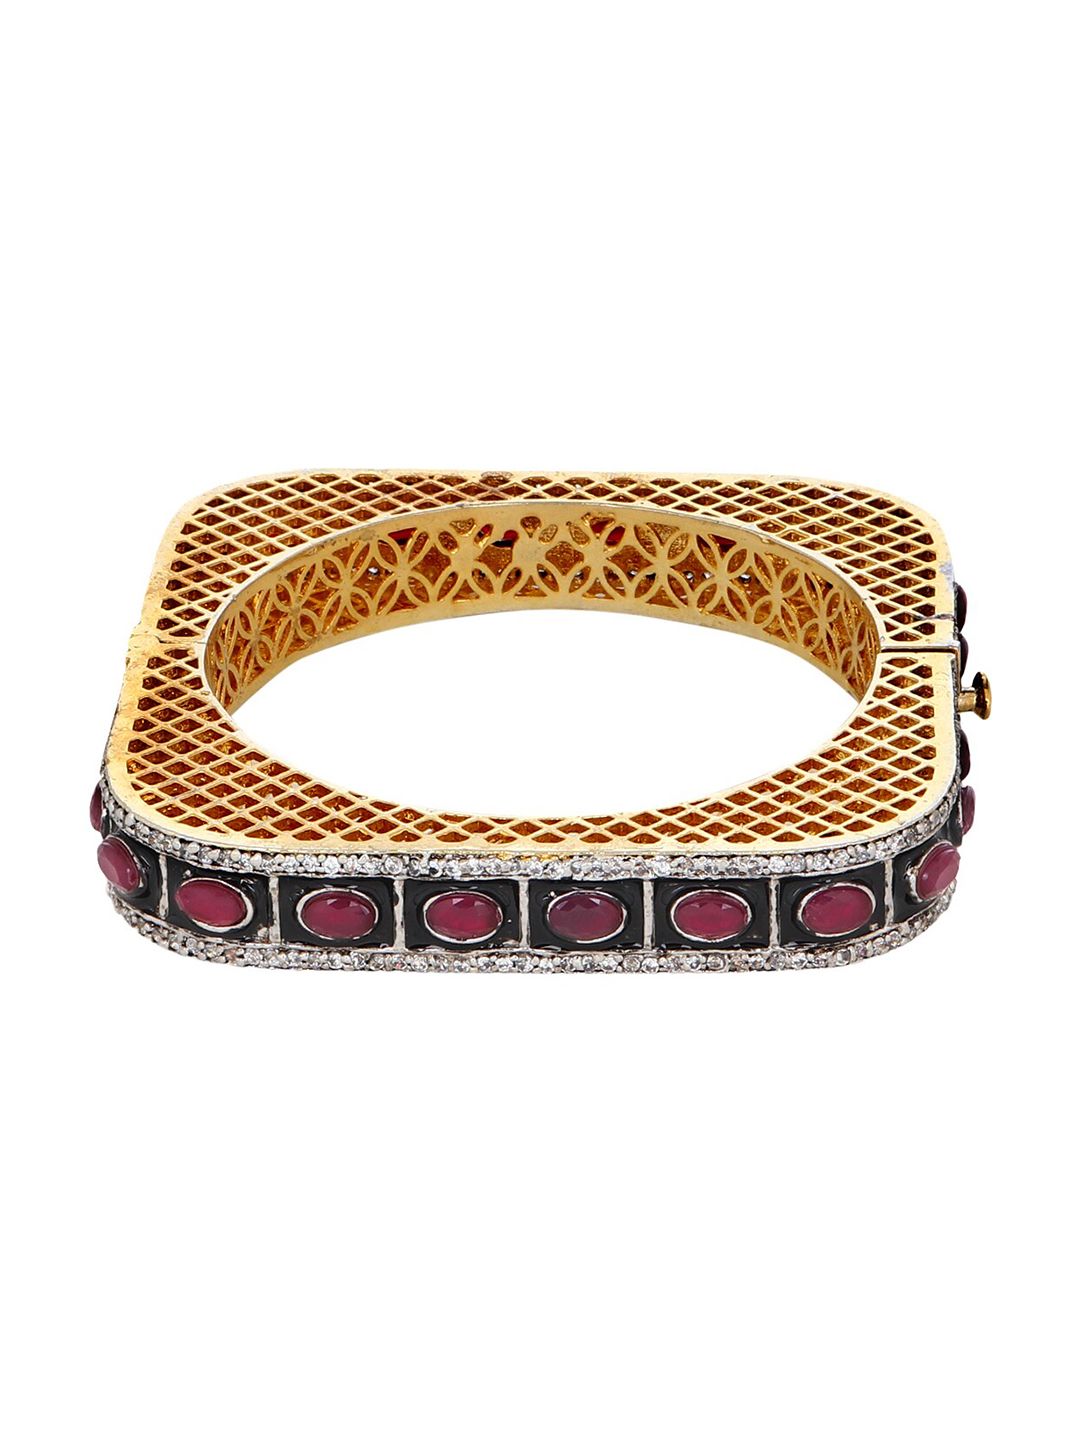 Adwitiya Collection Women Gold & Black Handcrafted Gold-Plated Bangle-Style Bracelet Price in India